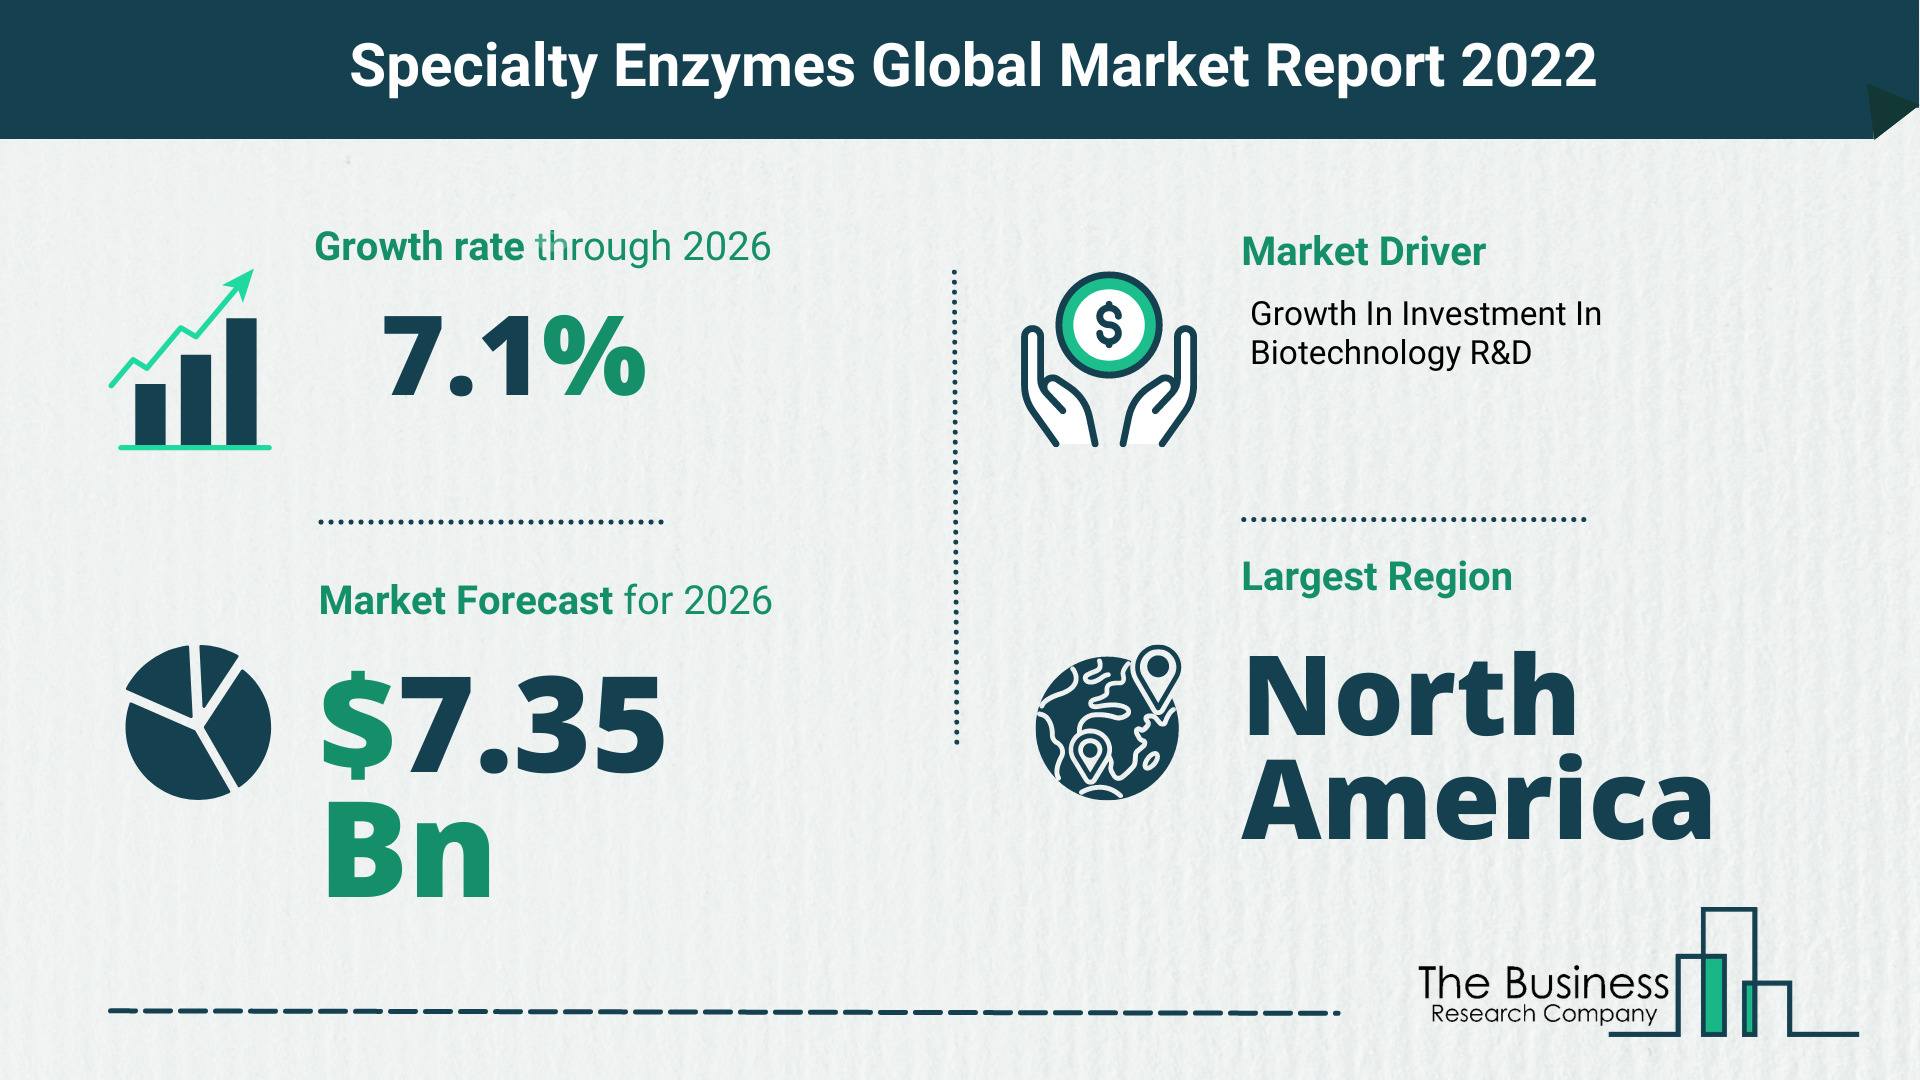 What Is The Specialty Enzymes Market Overview In 2022?